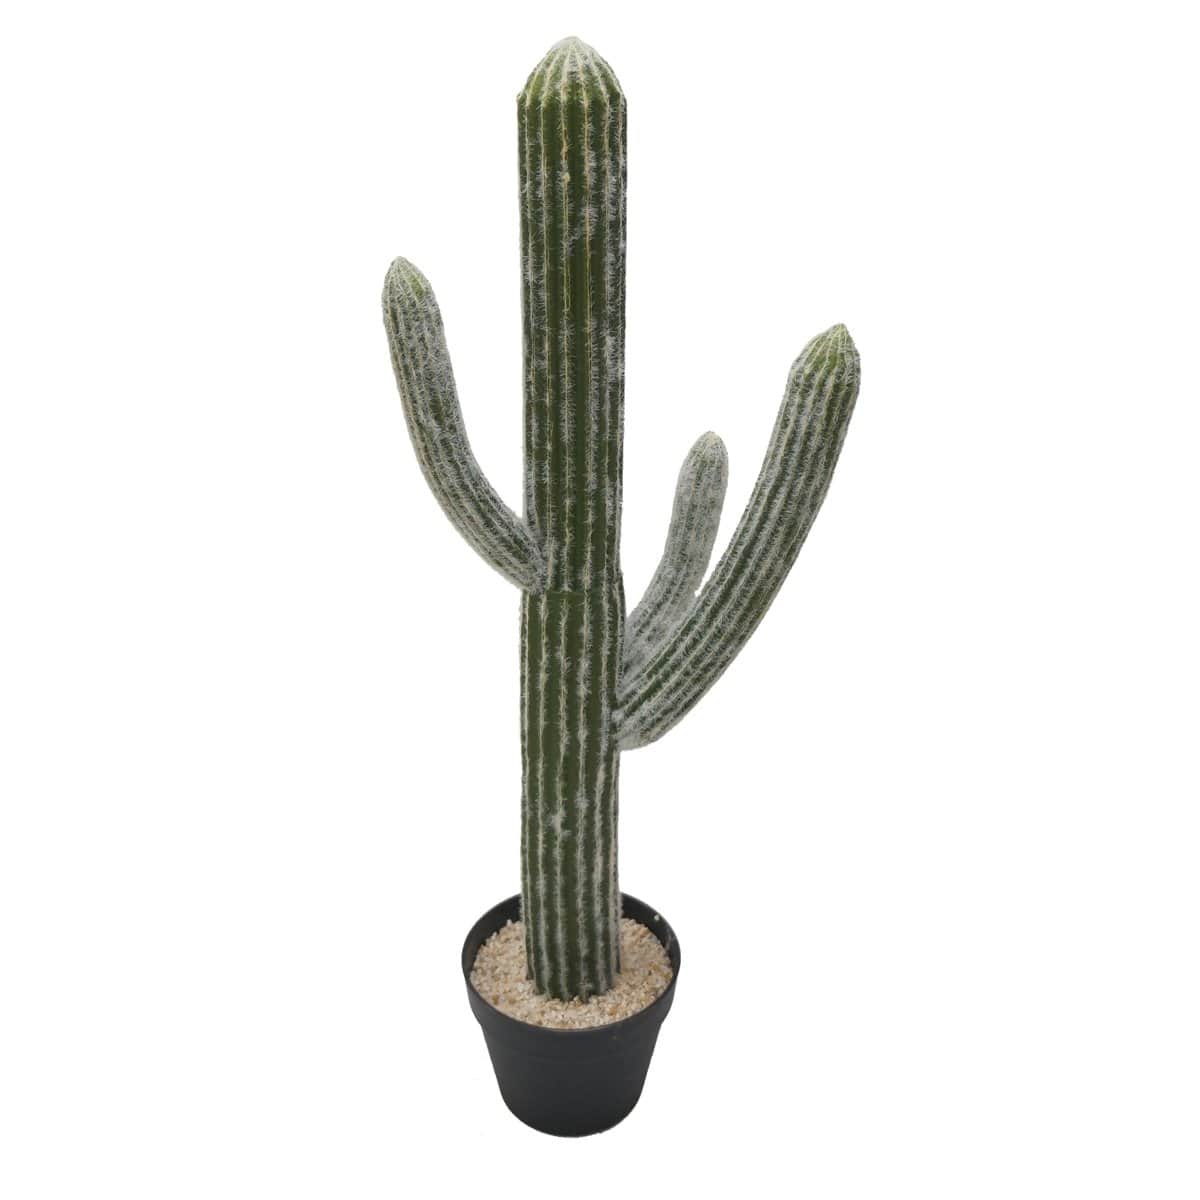 AB-F29562 Potted Faux Saguaro Cactus picket and rail